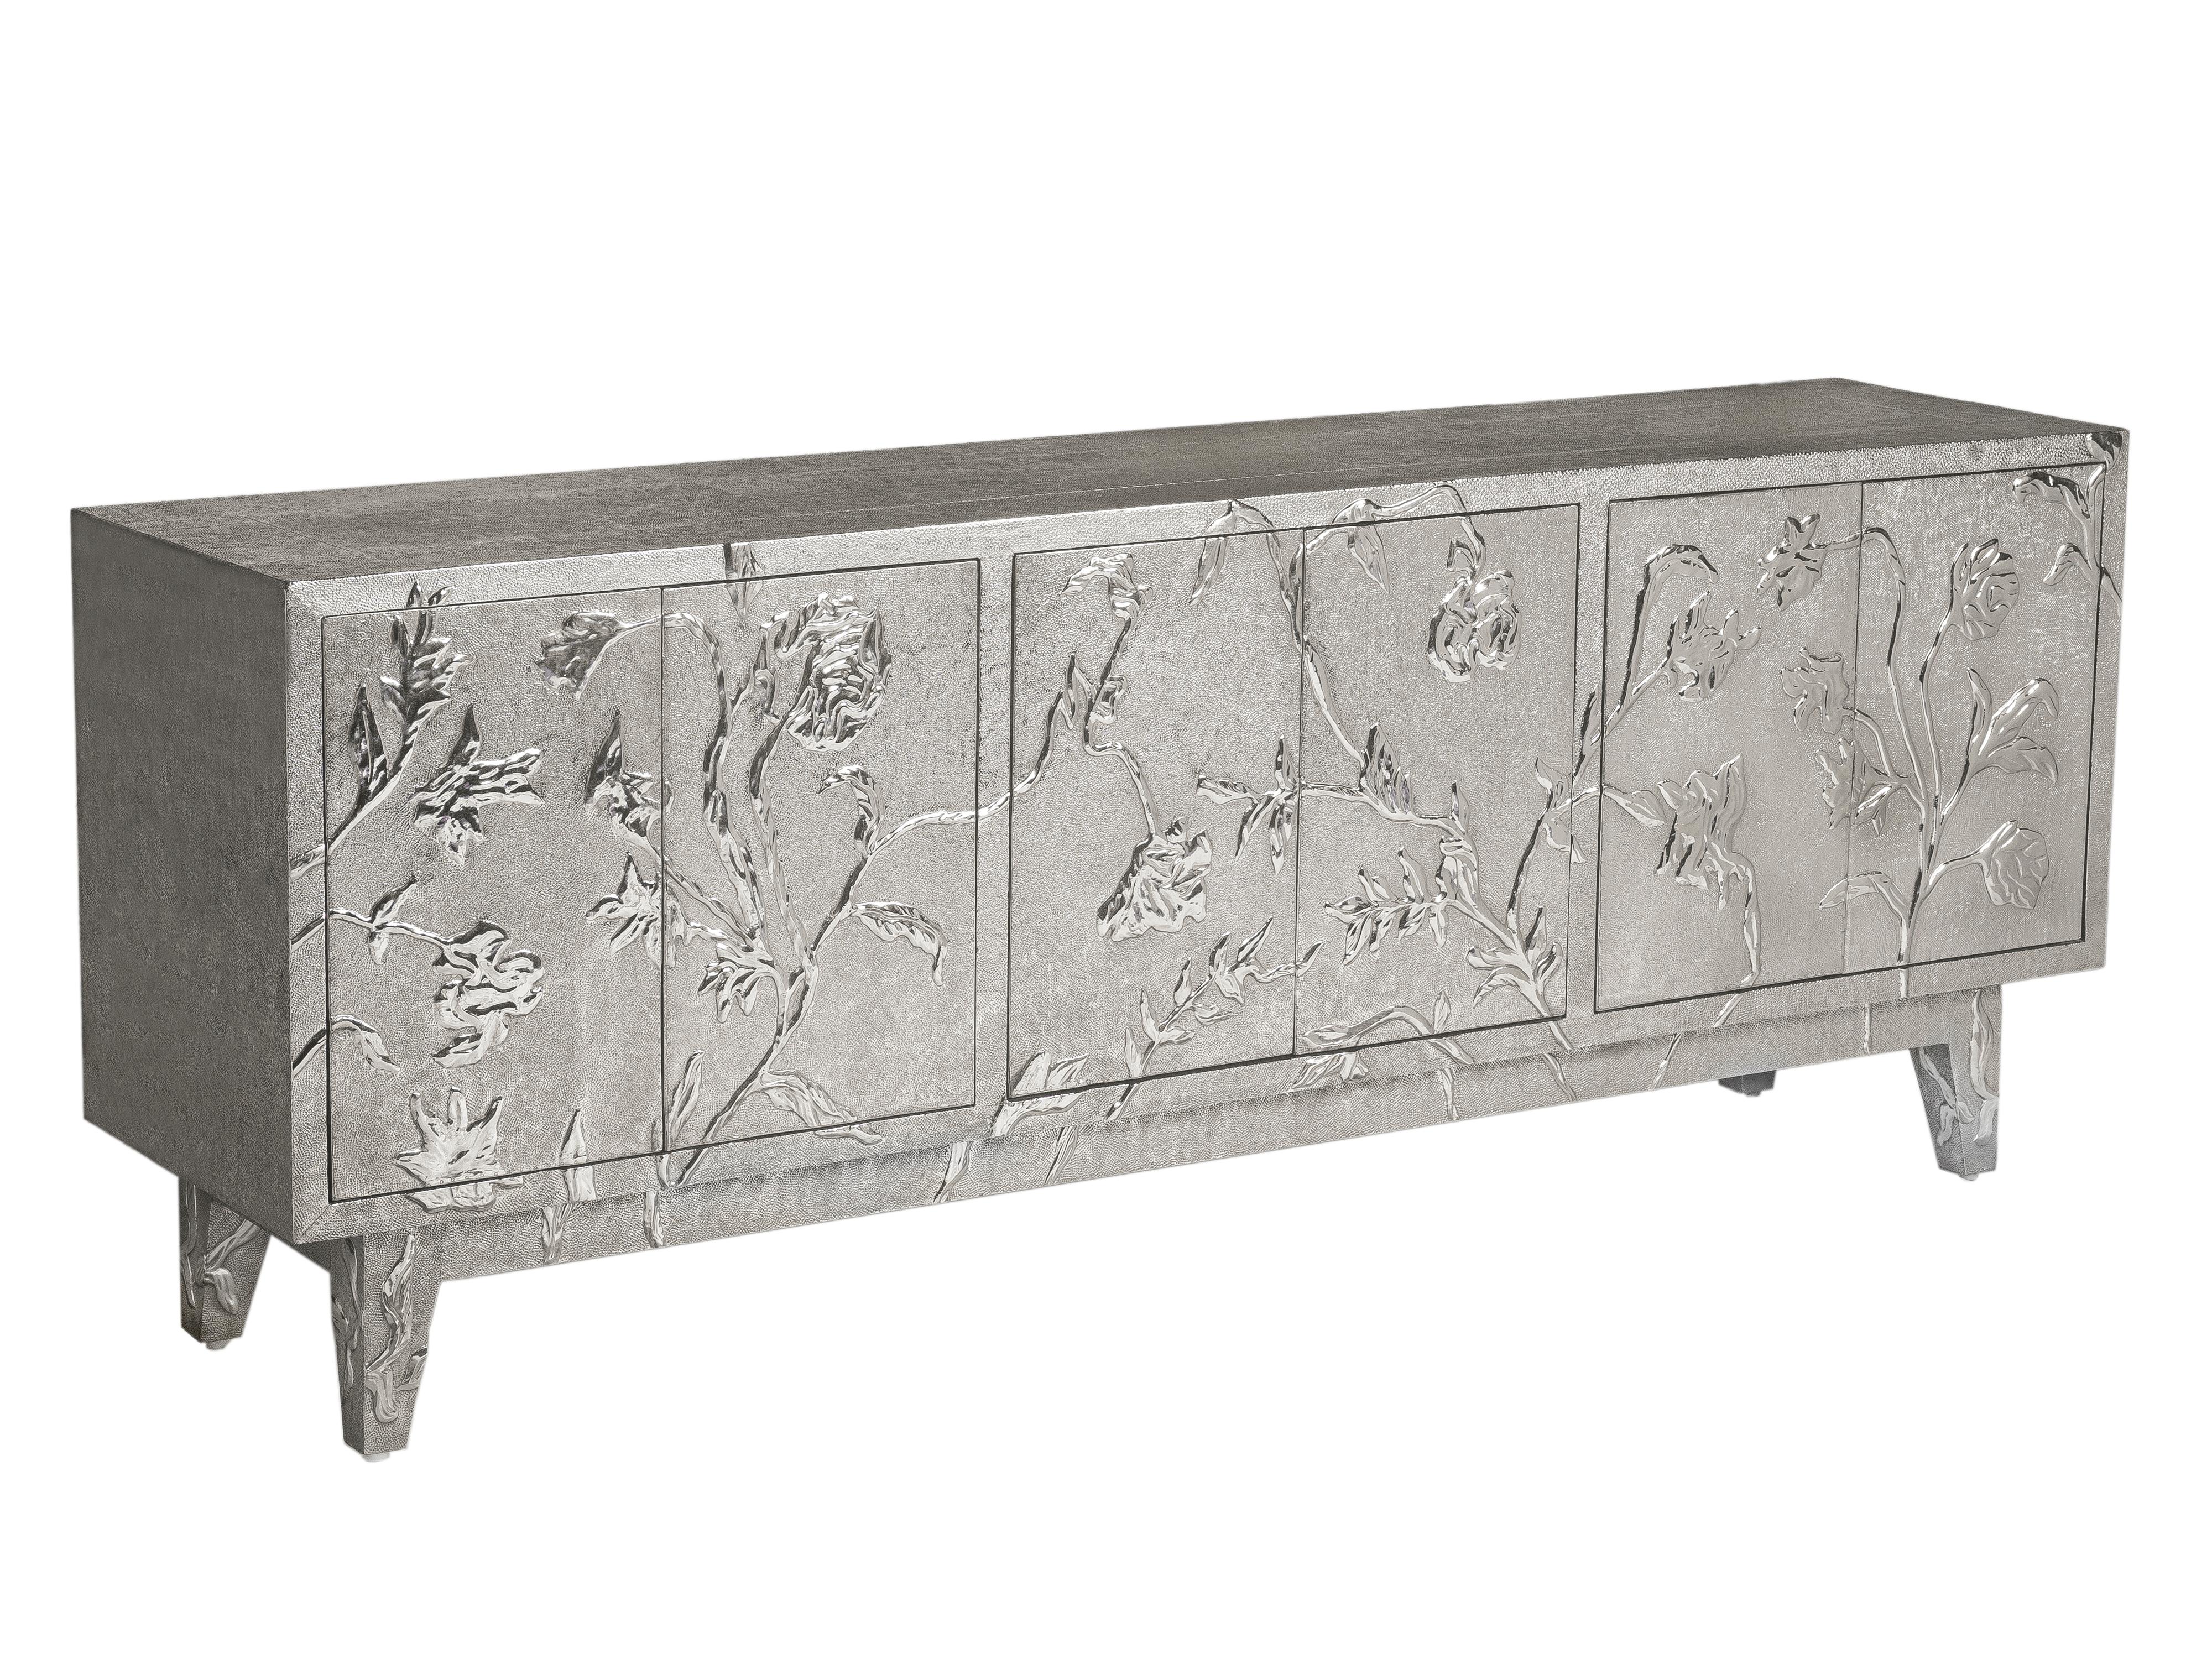 Floral hand carved credenza in white bronze metal clad is Inspired by the floral motifs used in the paintings of palaces of Rajasthan. This is one of the bestselling credenzas of Stephanie Odegard's collection, which was designed be Paul Mathieu.